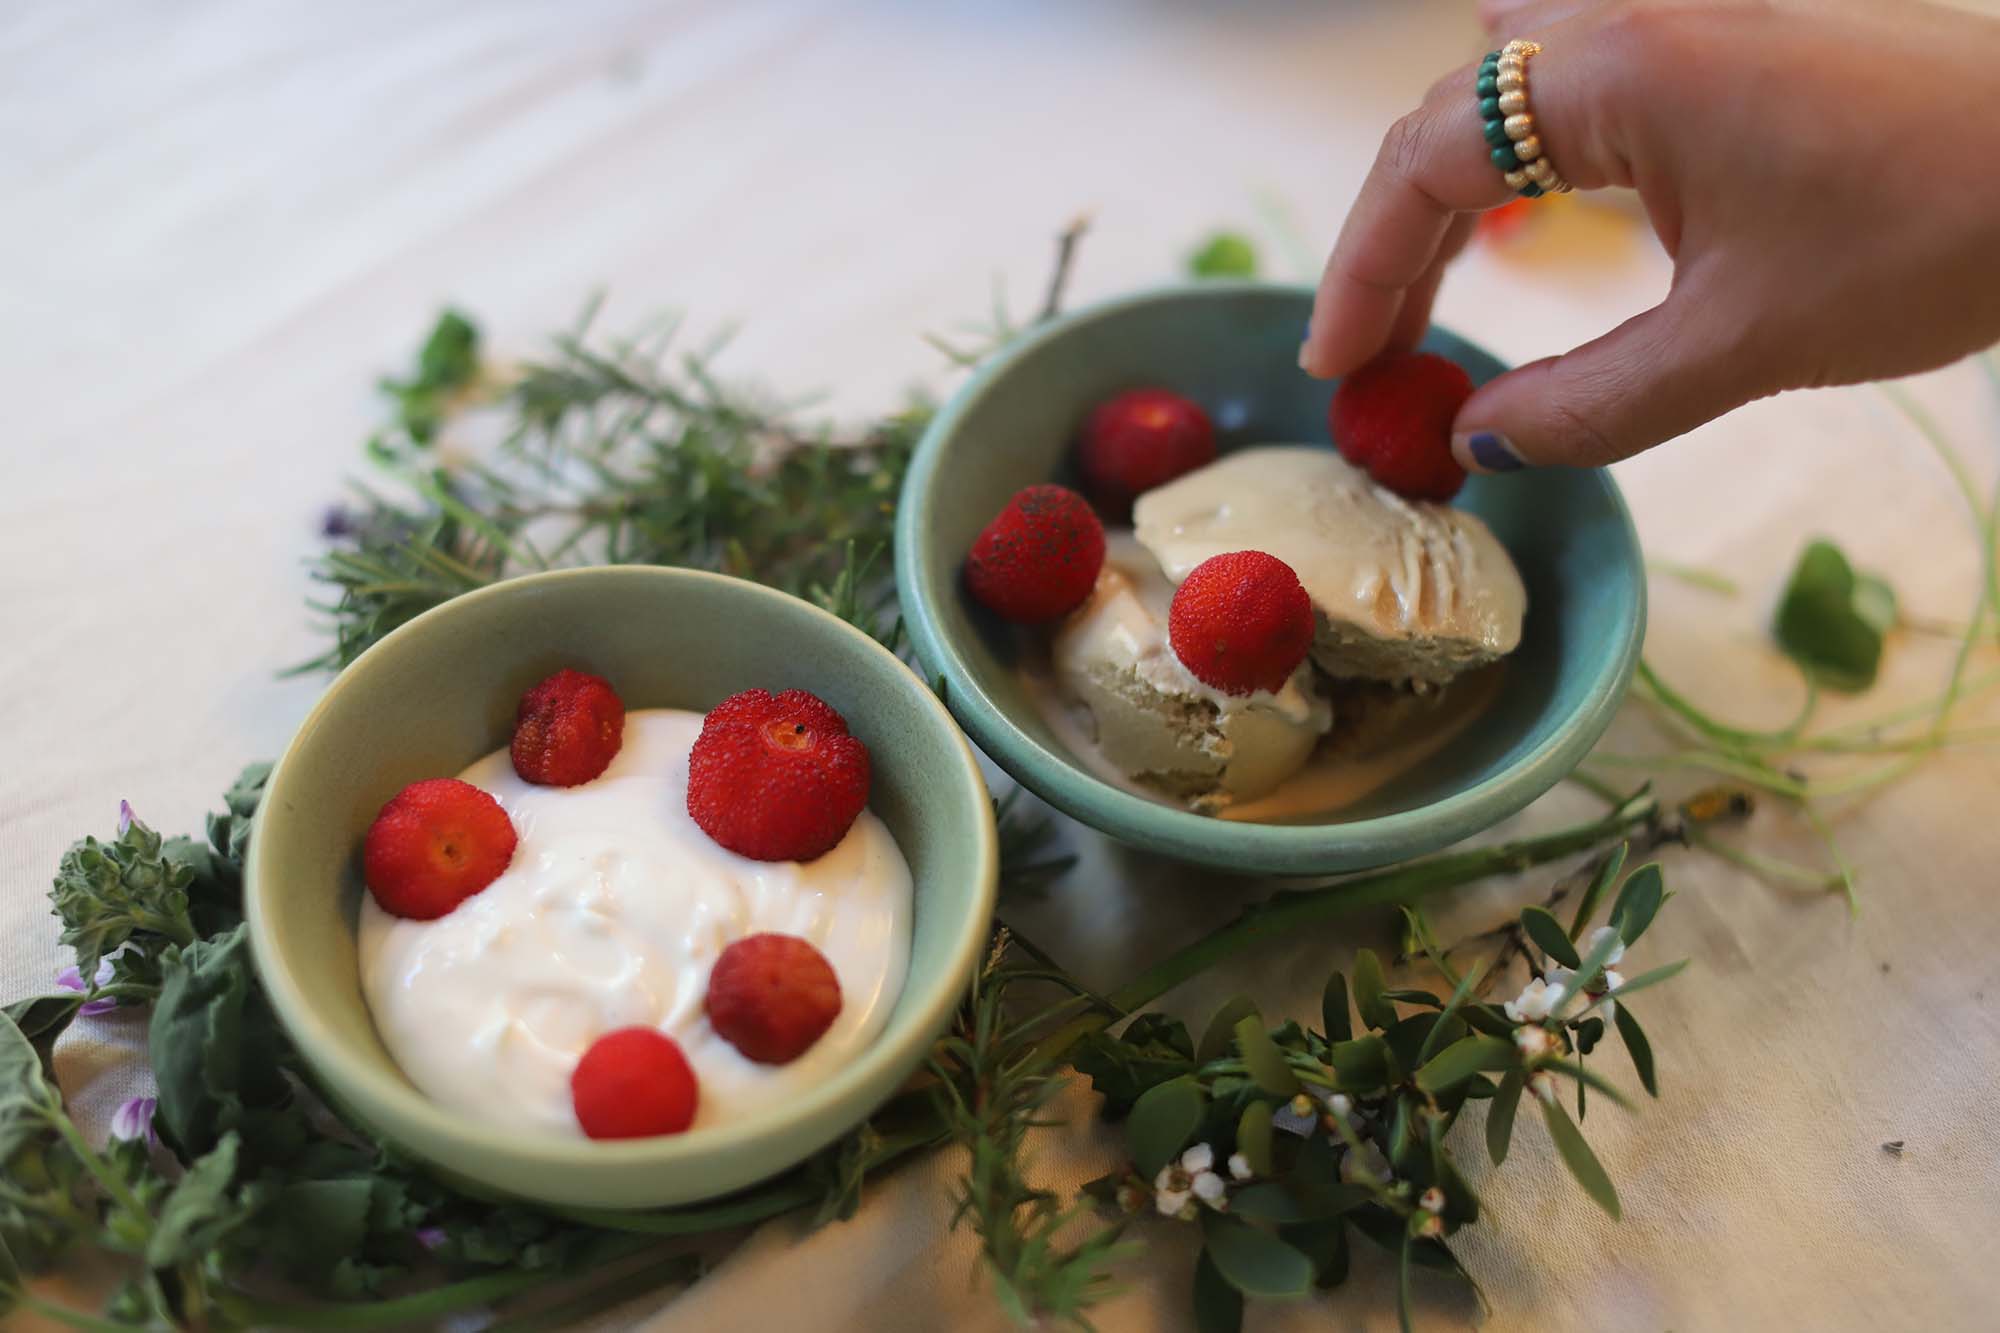 Red berries arranged on top of bowls of whipped cream and ice cream.